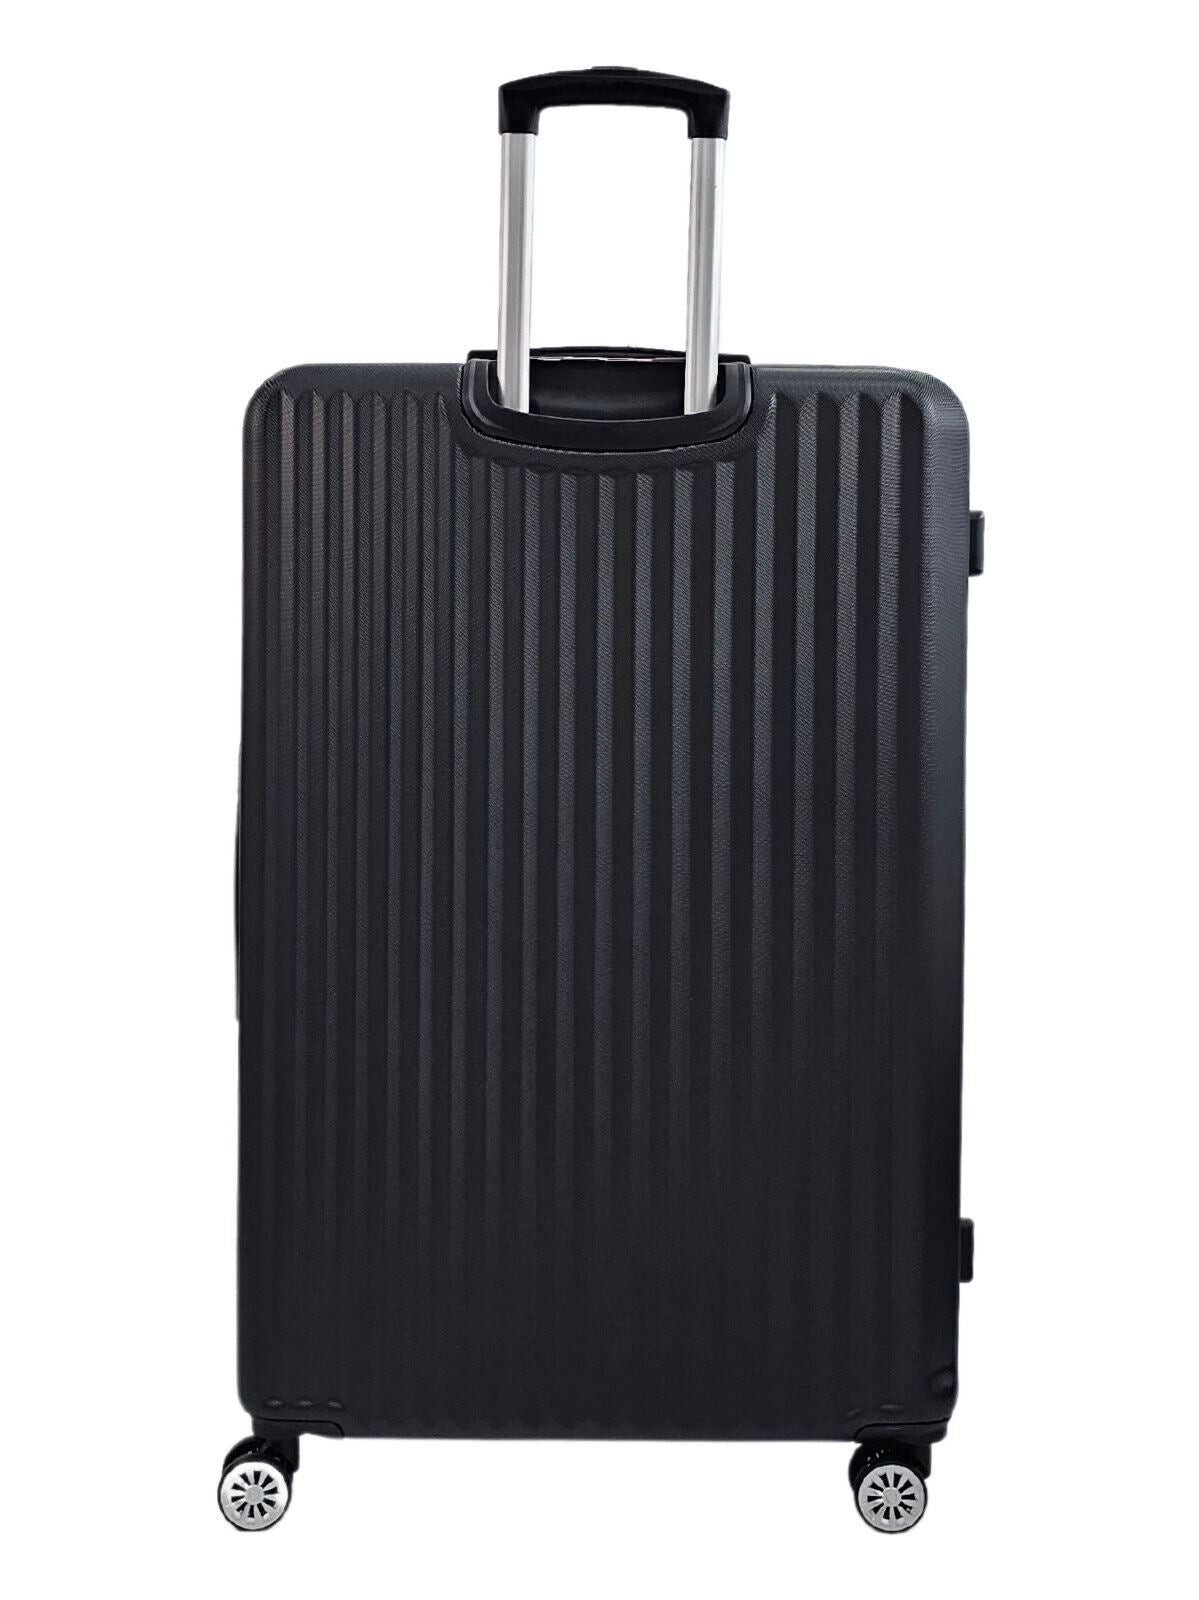 Albertville Extra Large Hard Shell Suitcase in Black